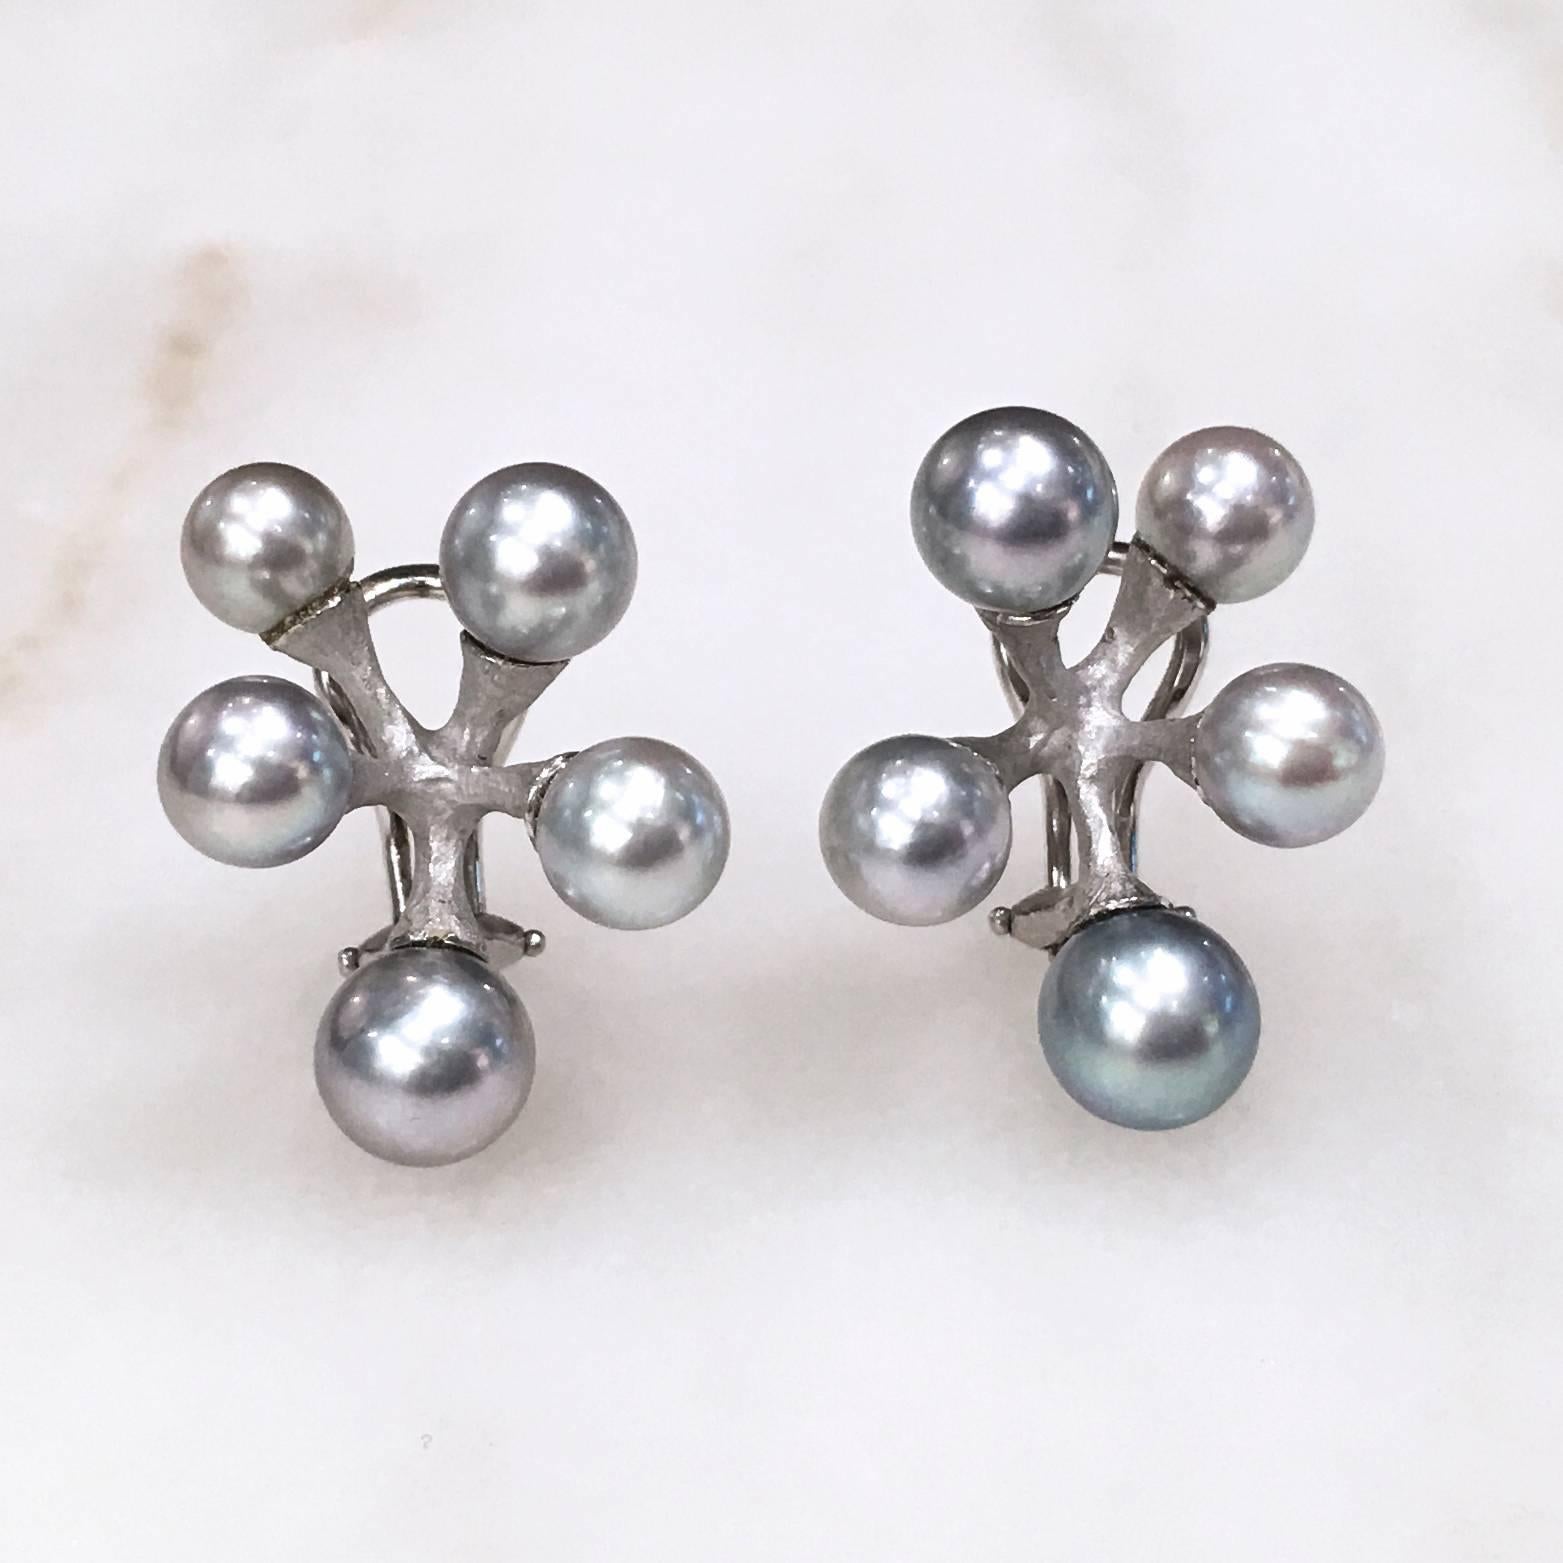 Baby Jacks Earrings handcrafted in matte-finished 18k white gold with lustrous silver Akoya pearls with overtones of blue, violet, and white. Post or clip can be removed upon request. 